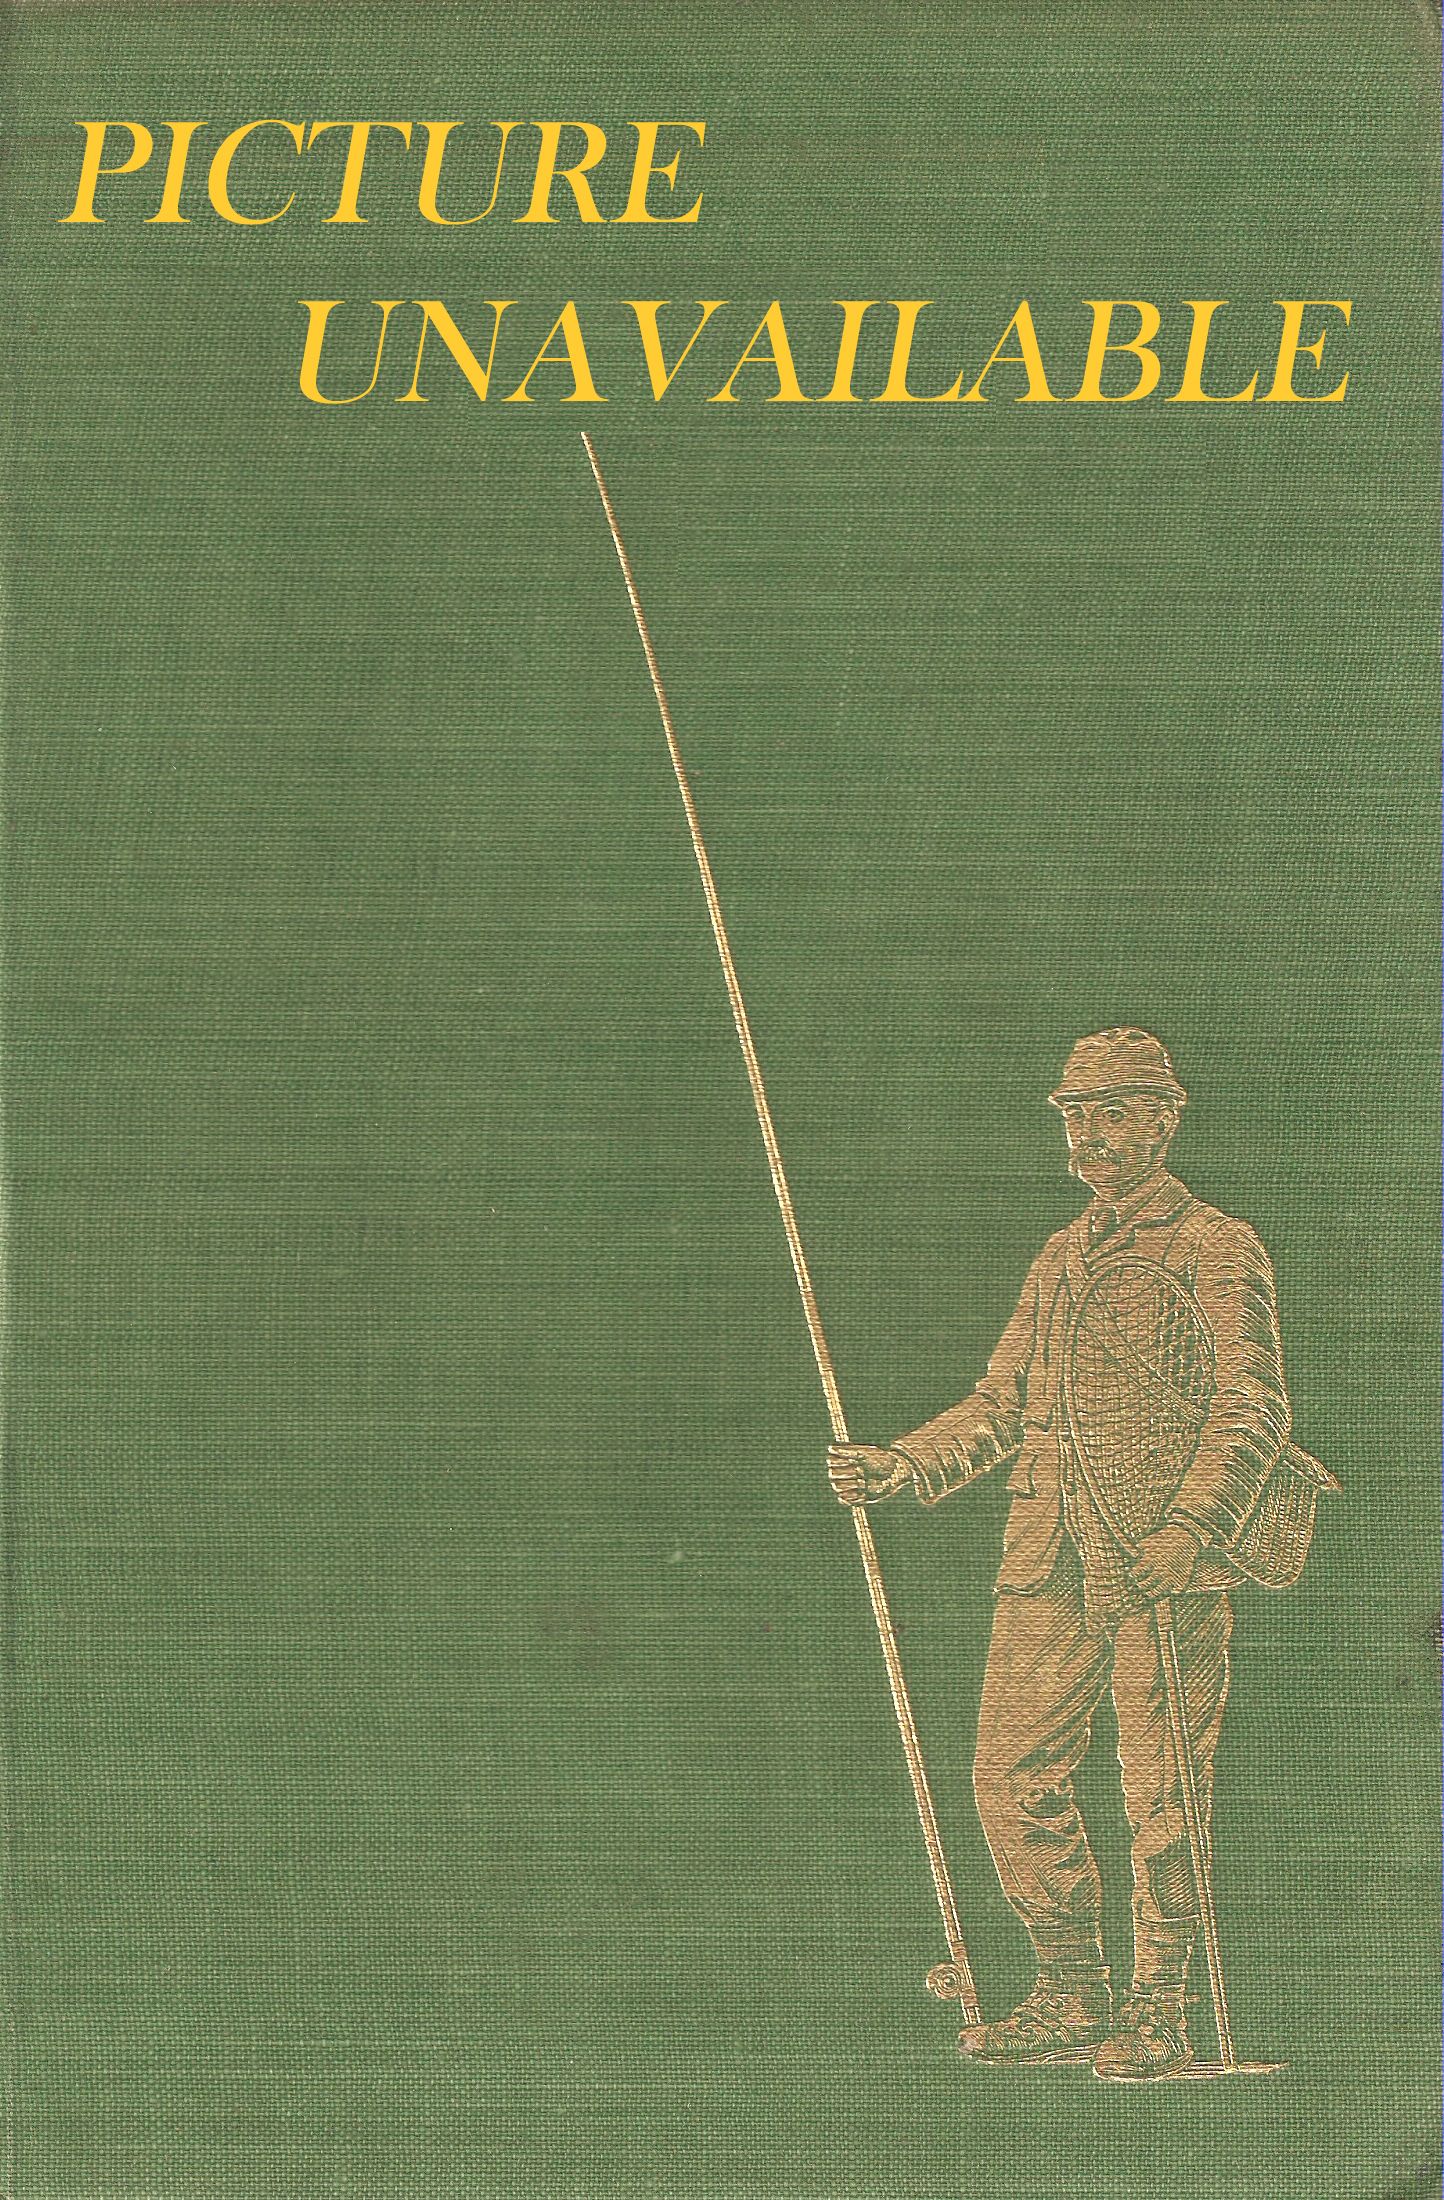 FISHING IN WALES: A GUIDE TO THE ANGLER. By Walter M. Gallichan (